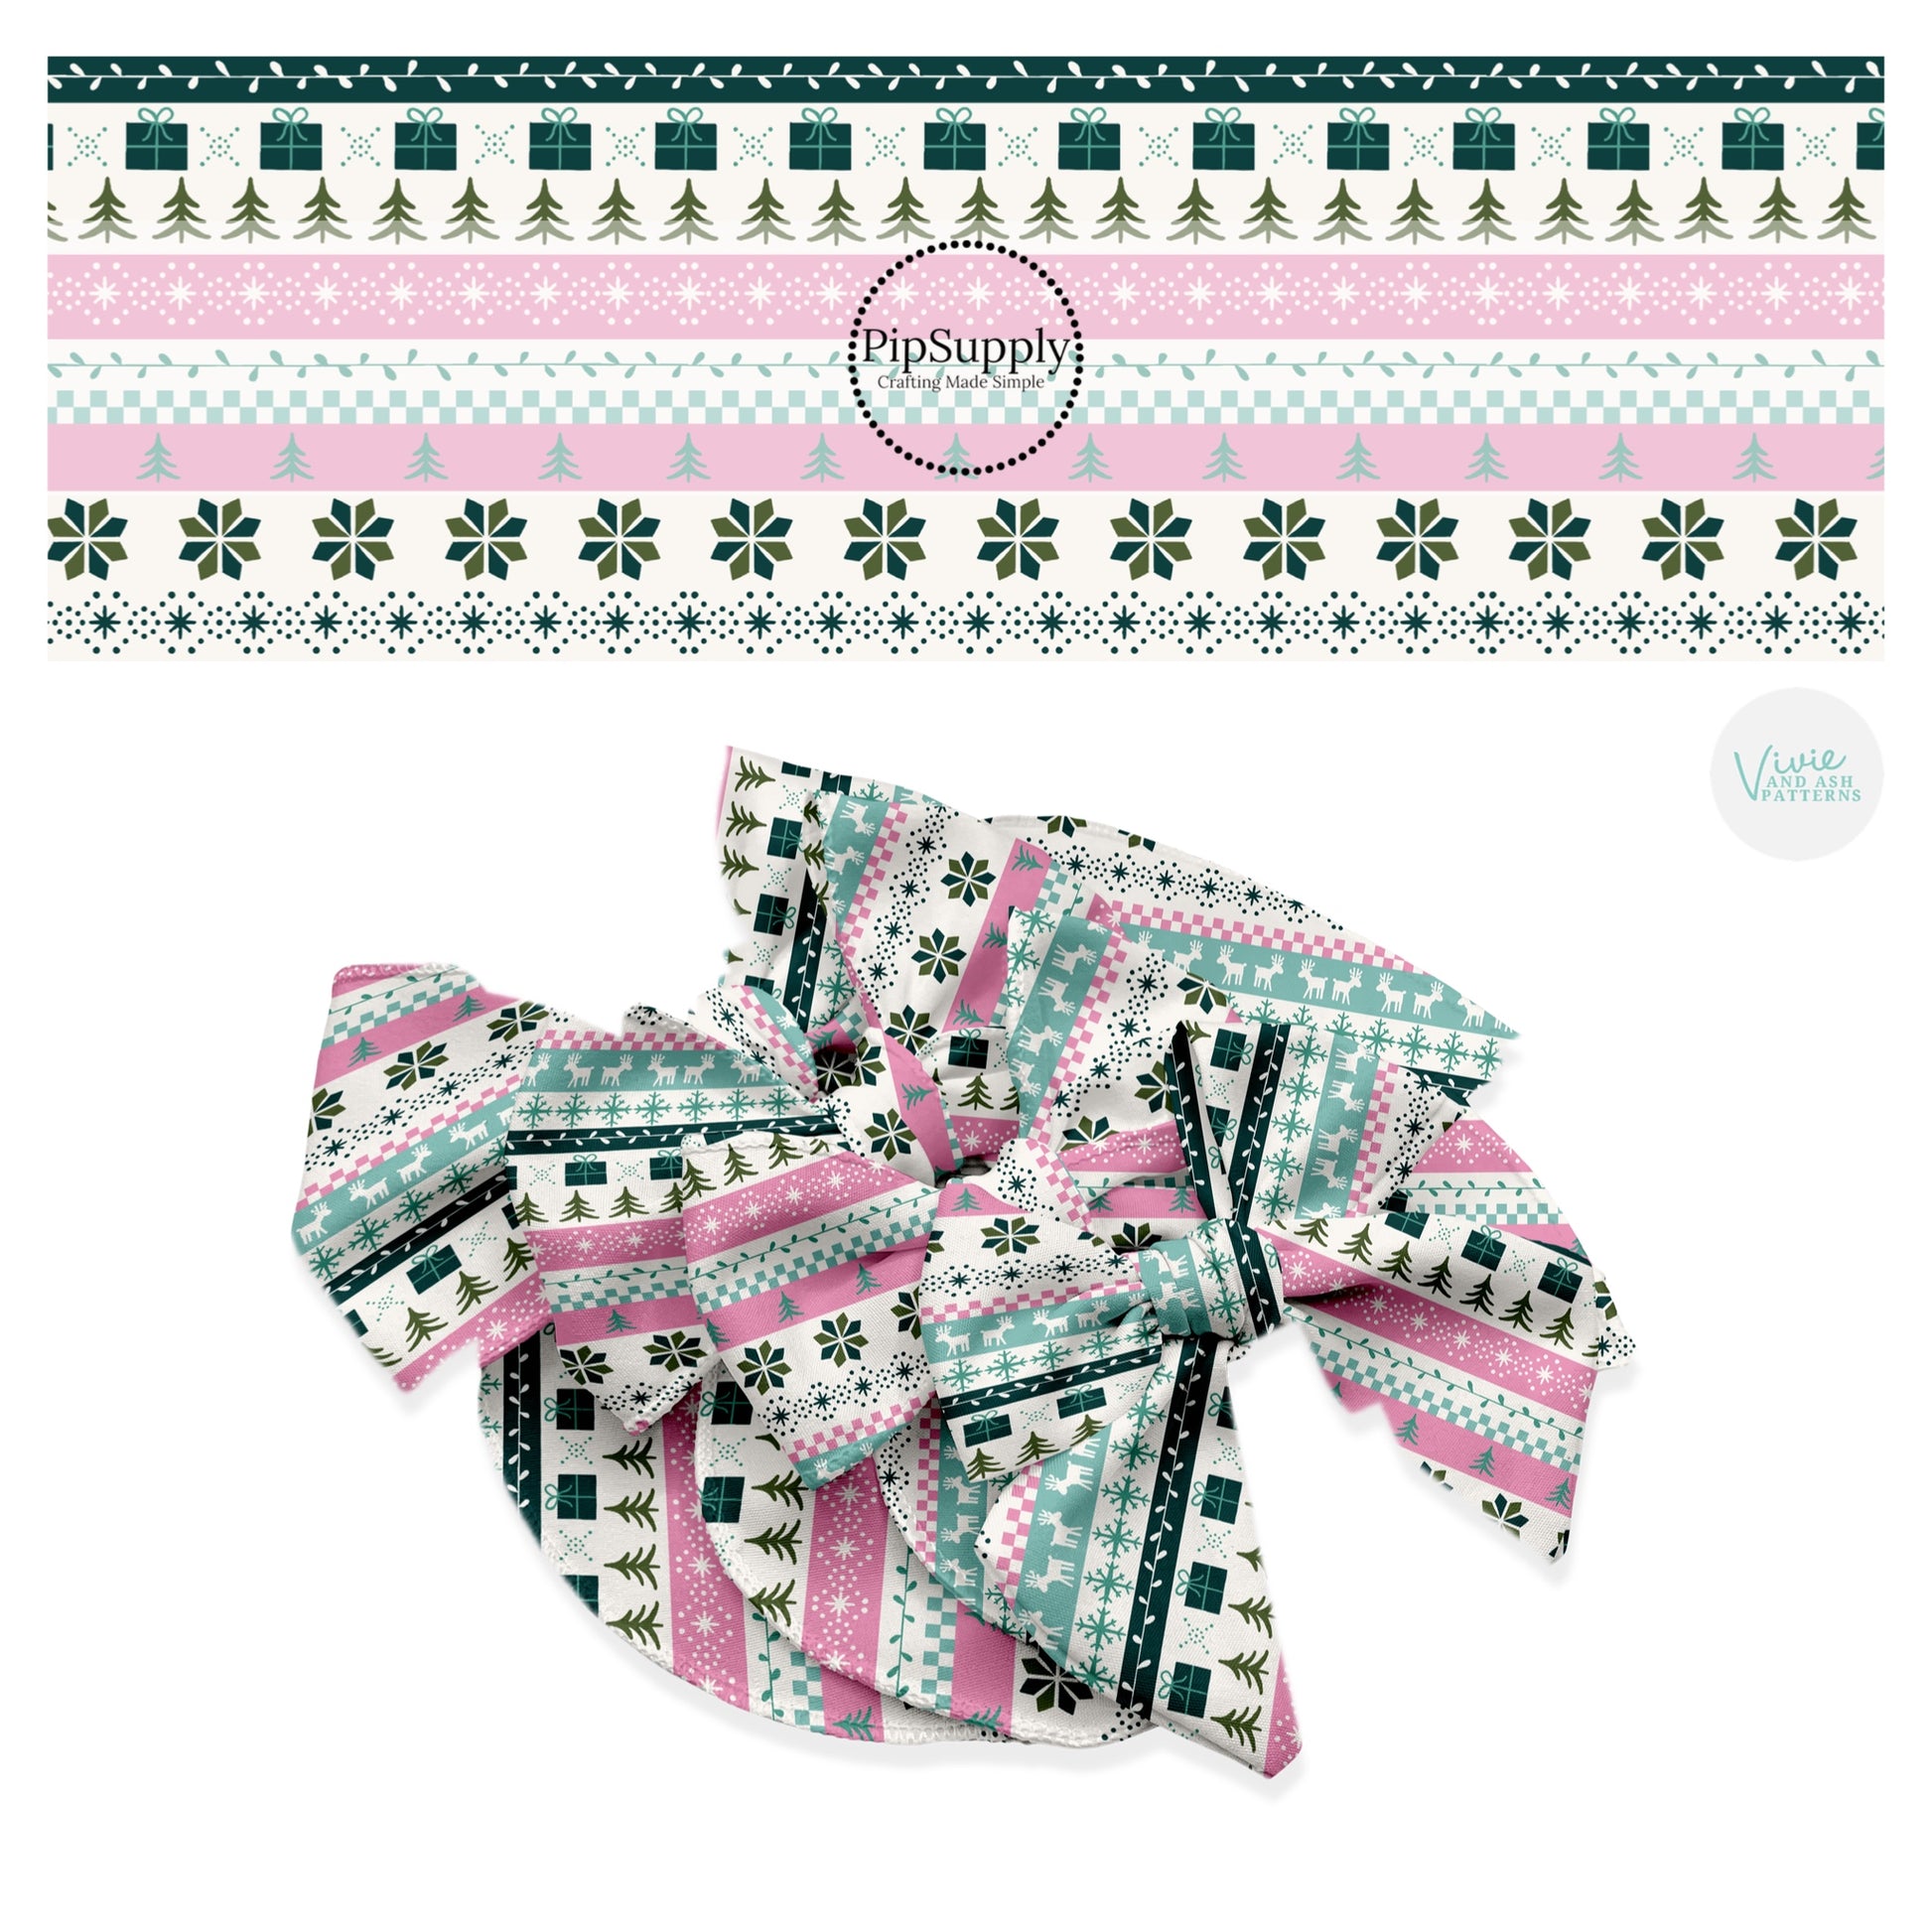 Striped winter sweater patterned hair bow strips